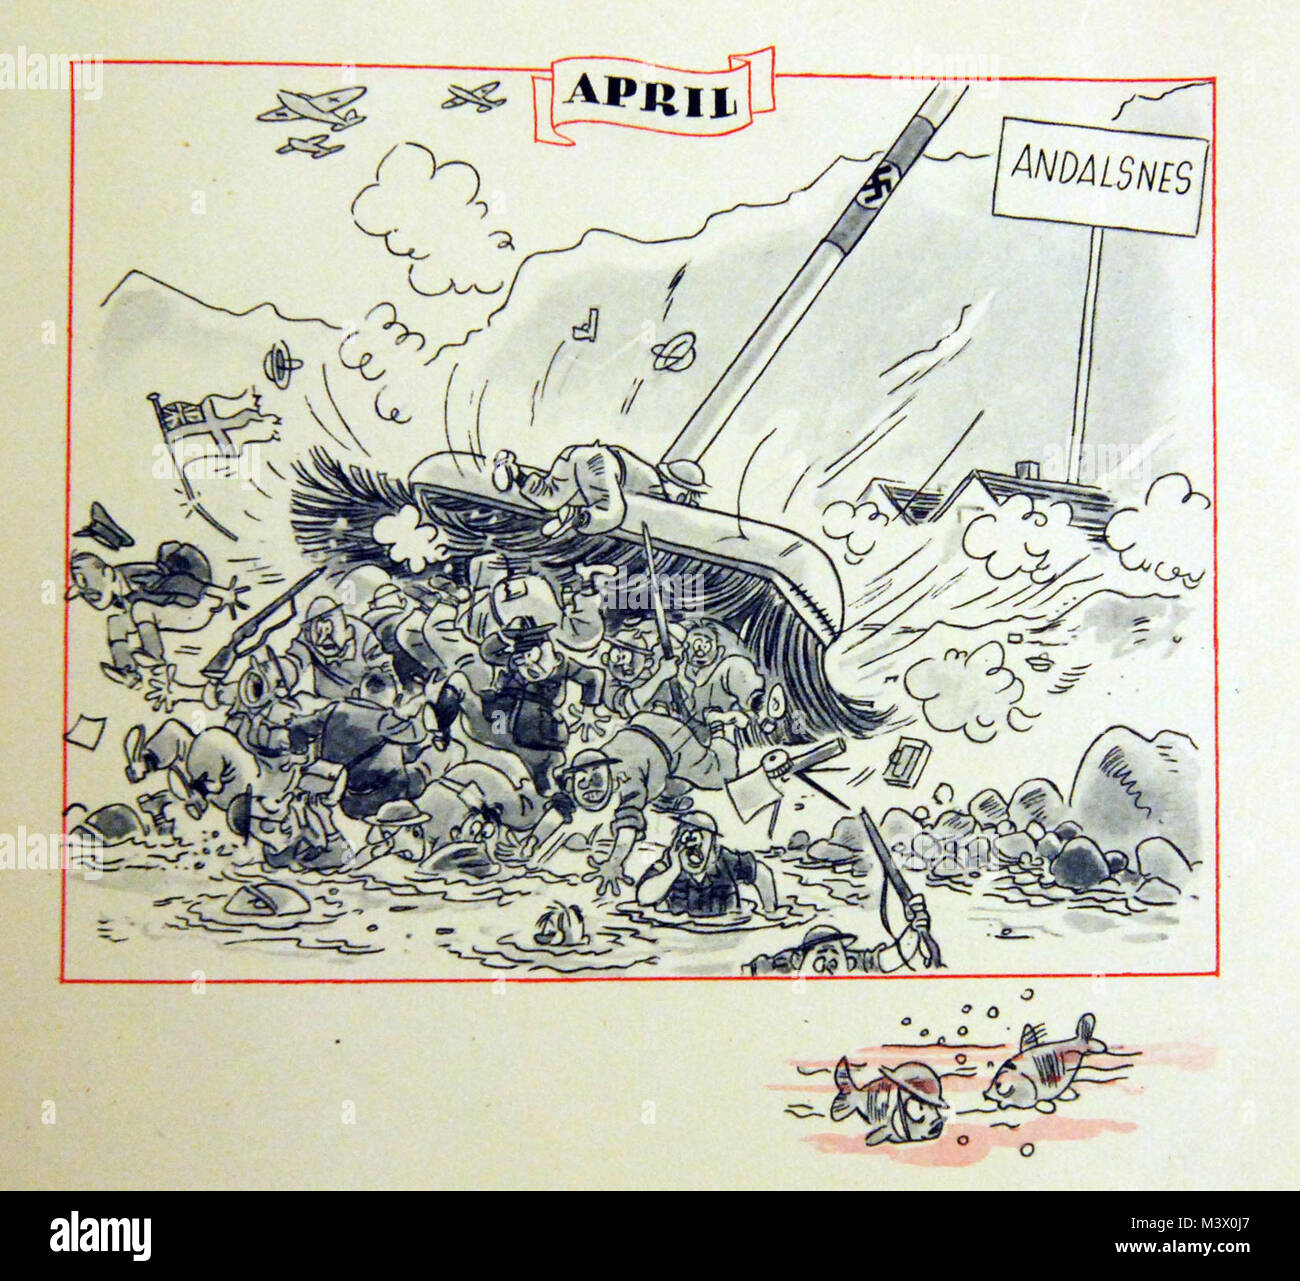 Lot-3867-6: WWII-Cartoons.   Twelve-month pamphlet ridiculing the British war situation in 1940. Shown:  April.   Image shows the British being pushed back during the Andalsnes, Norway, landings.   Courtesy of the Library of Congress.  (2018/02/02). Lot-3867-6 40045241241 o Stock Photo